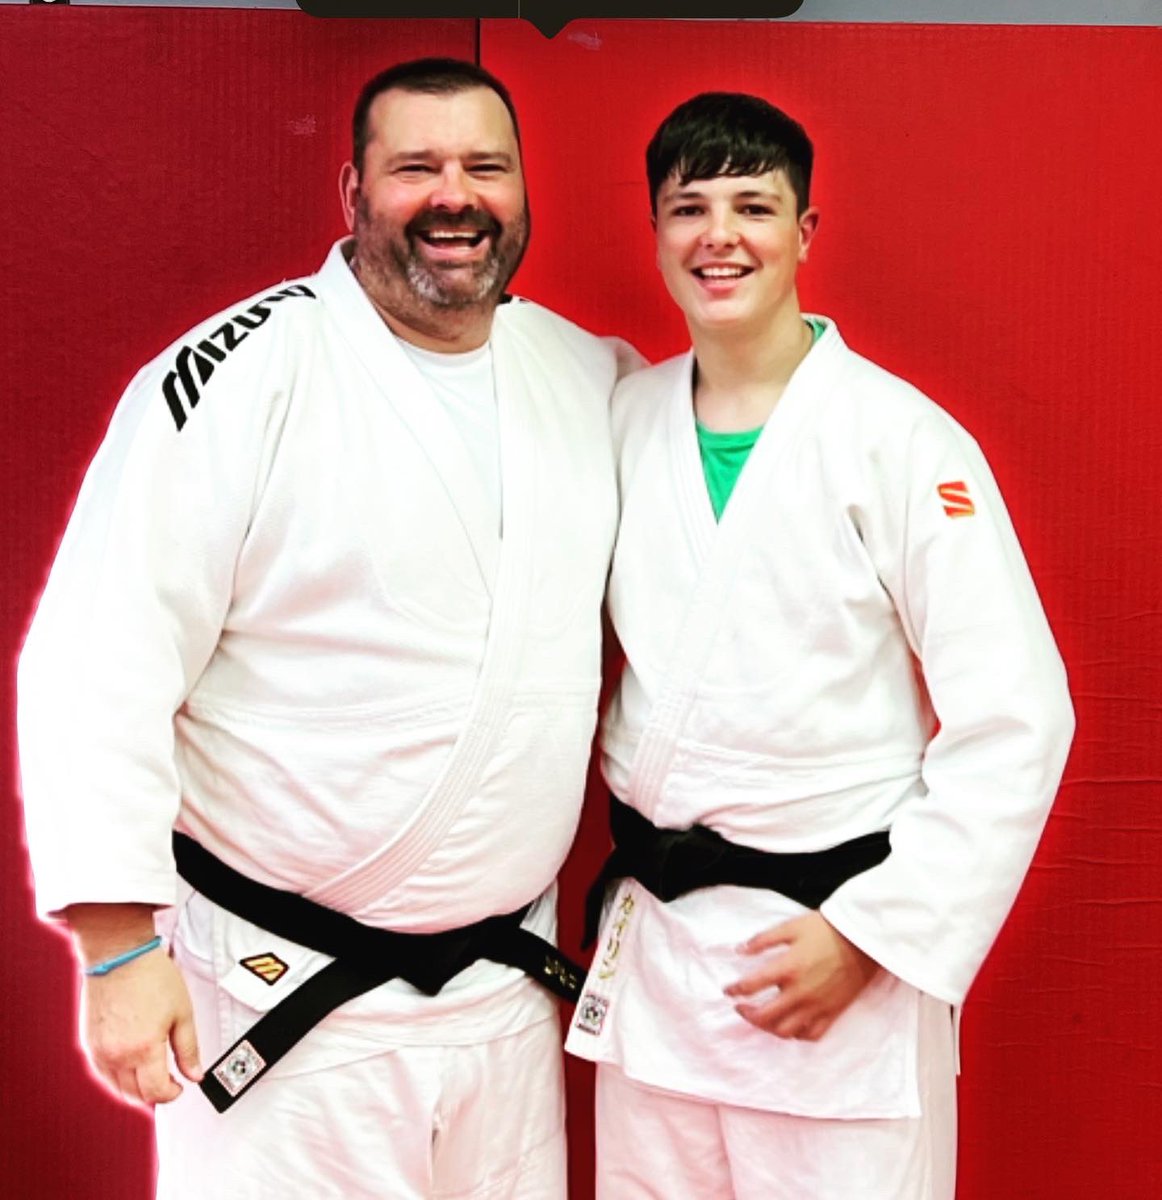 Congratulations to @jadencalder1875 for fighting for his 1st Dan, Black Belt,proud dad moment, at only 15, Jaden completed a line up, beating 5 players, but also showed his knowledge, by passing his theory and kata test. @ActiveClacks  @LornshillPE